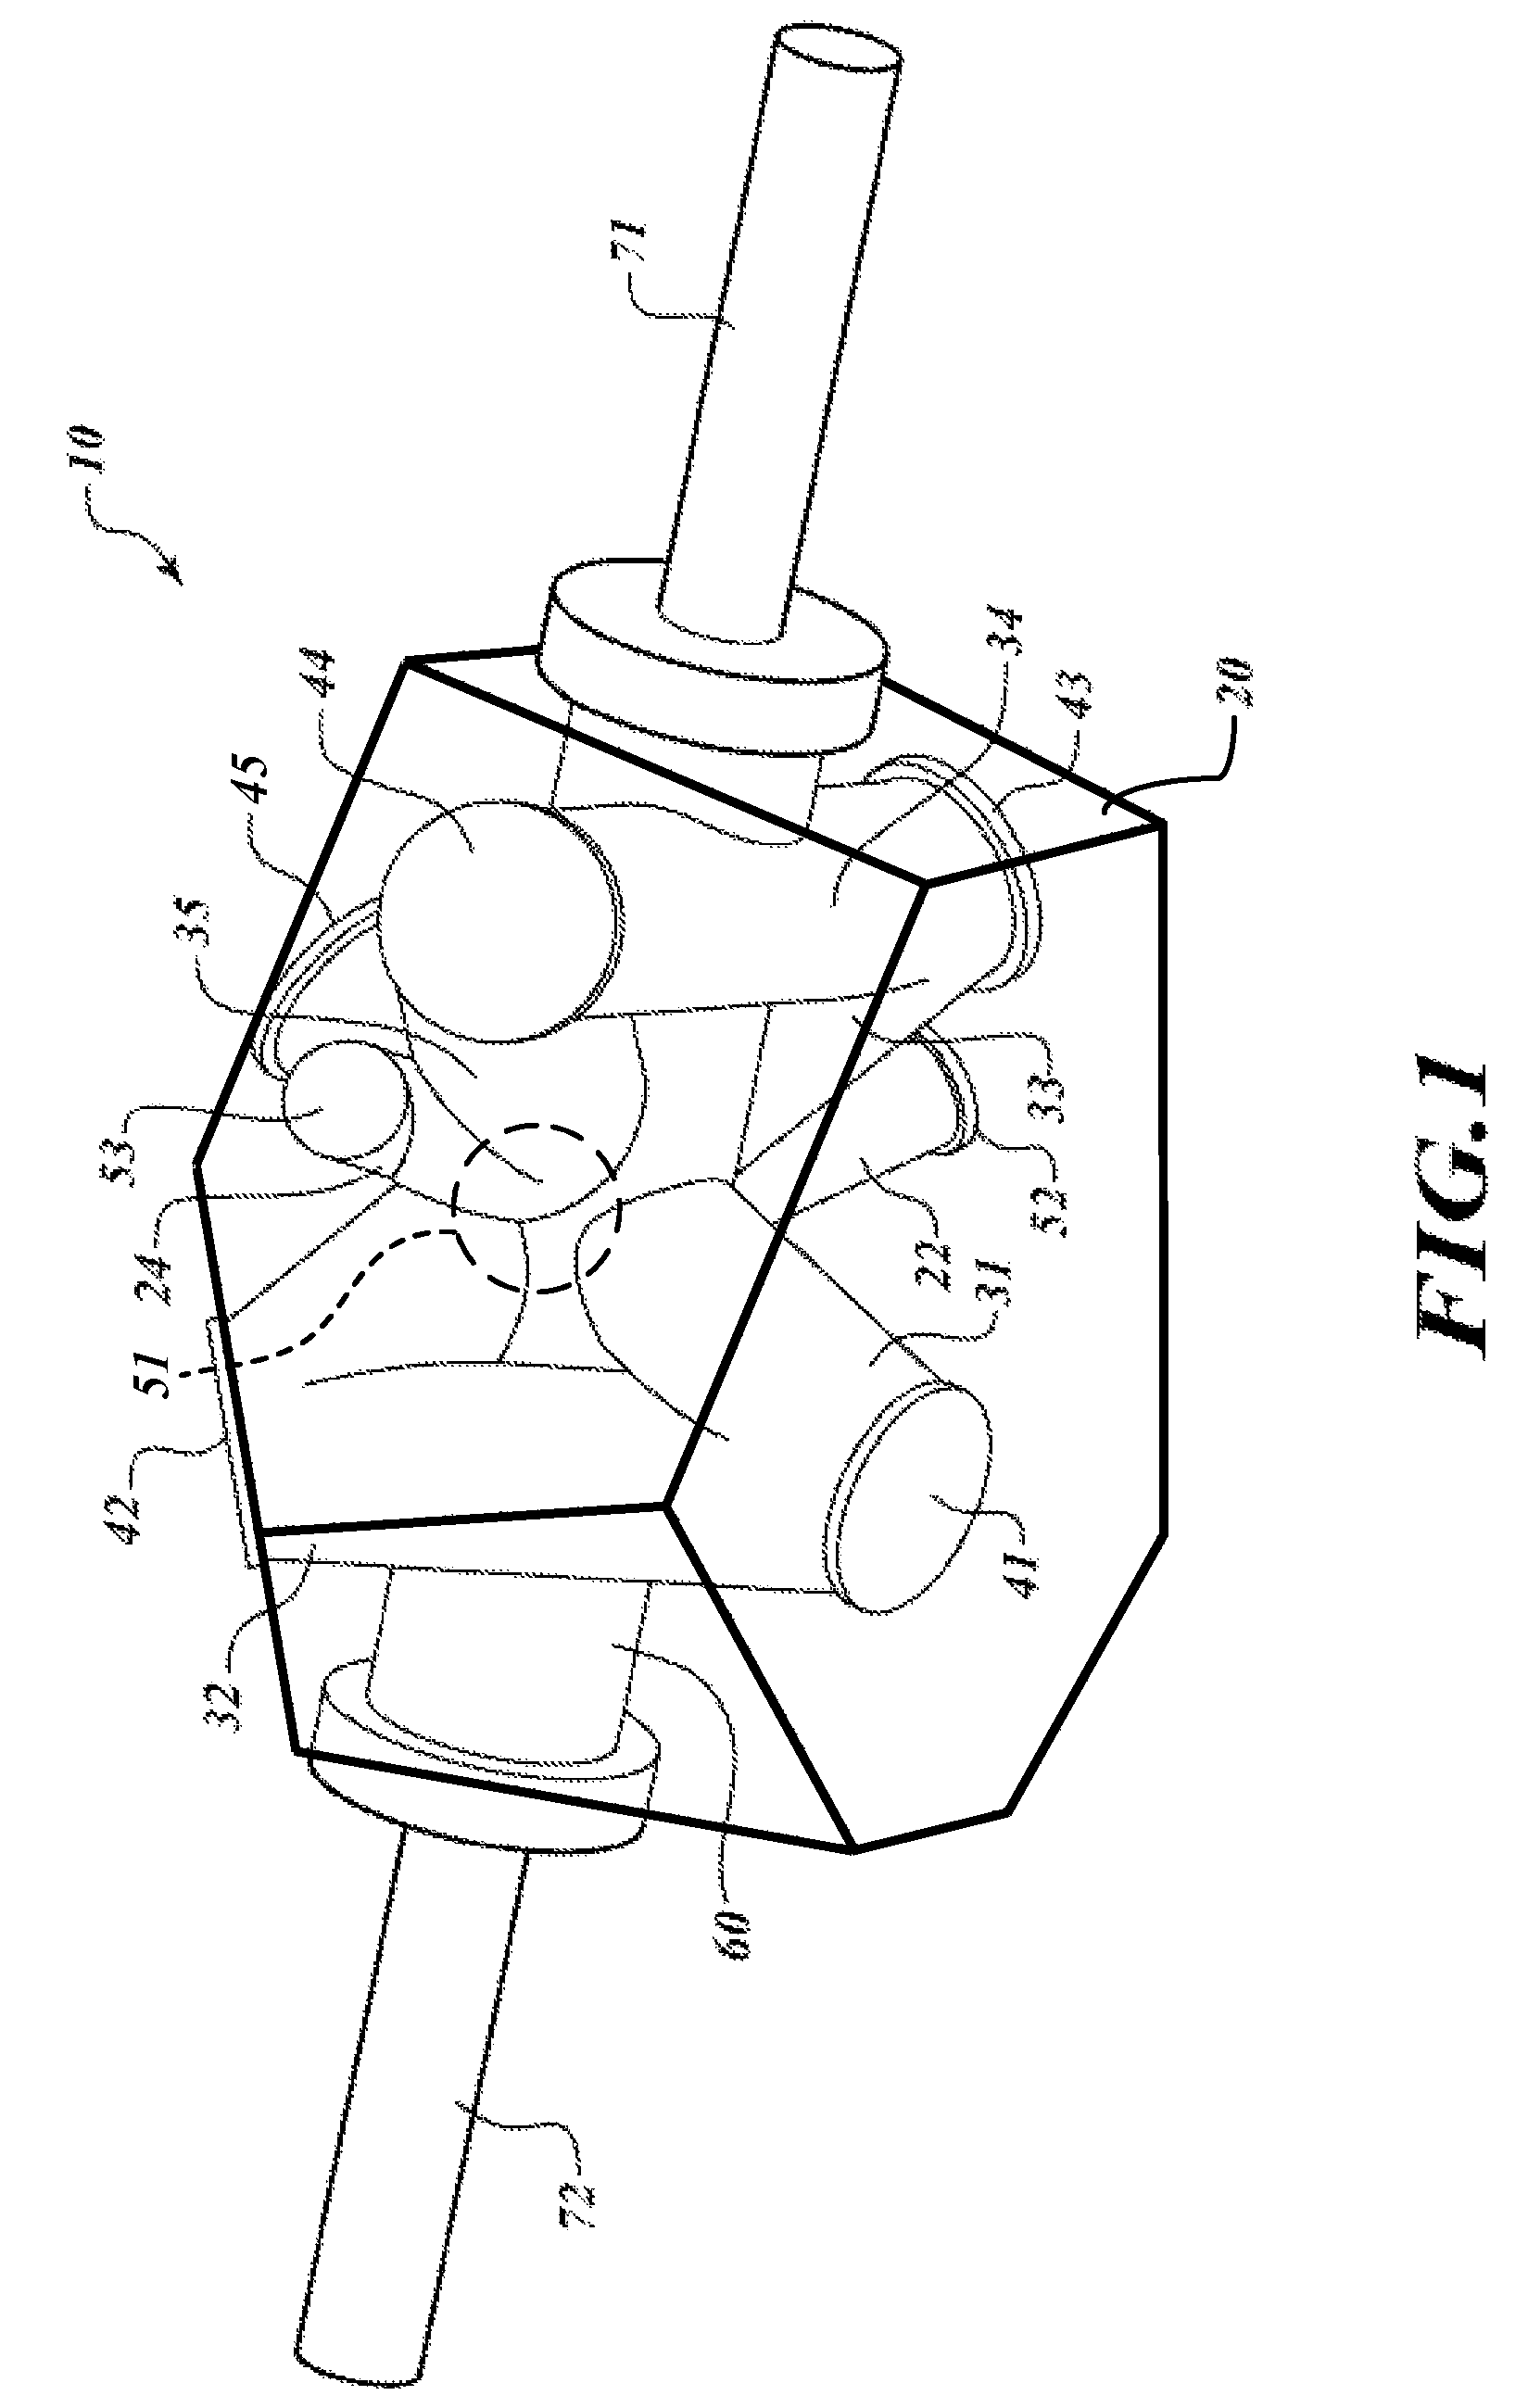 Physics package design for a cold atom primary frequency standard